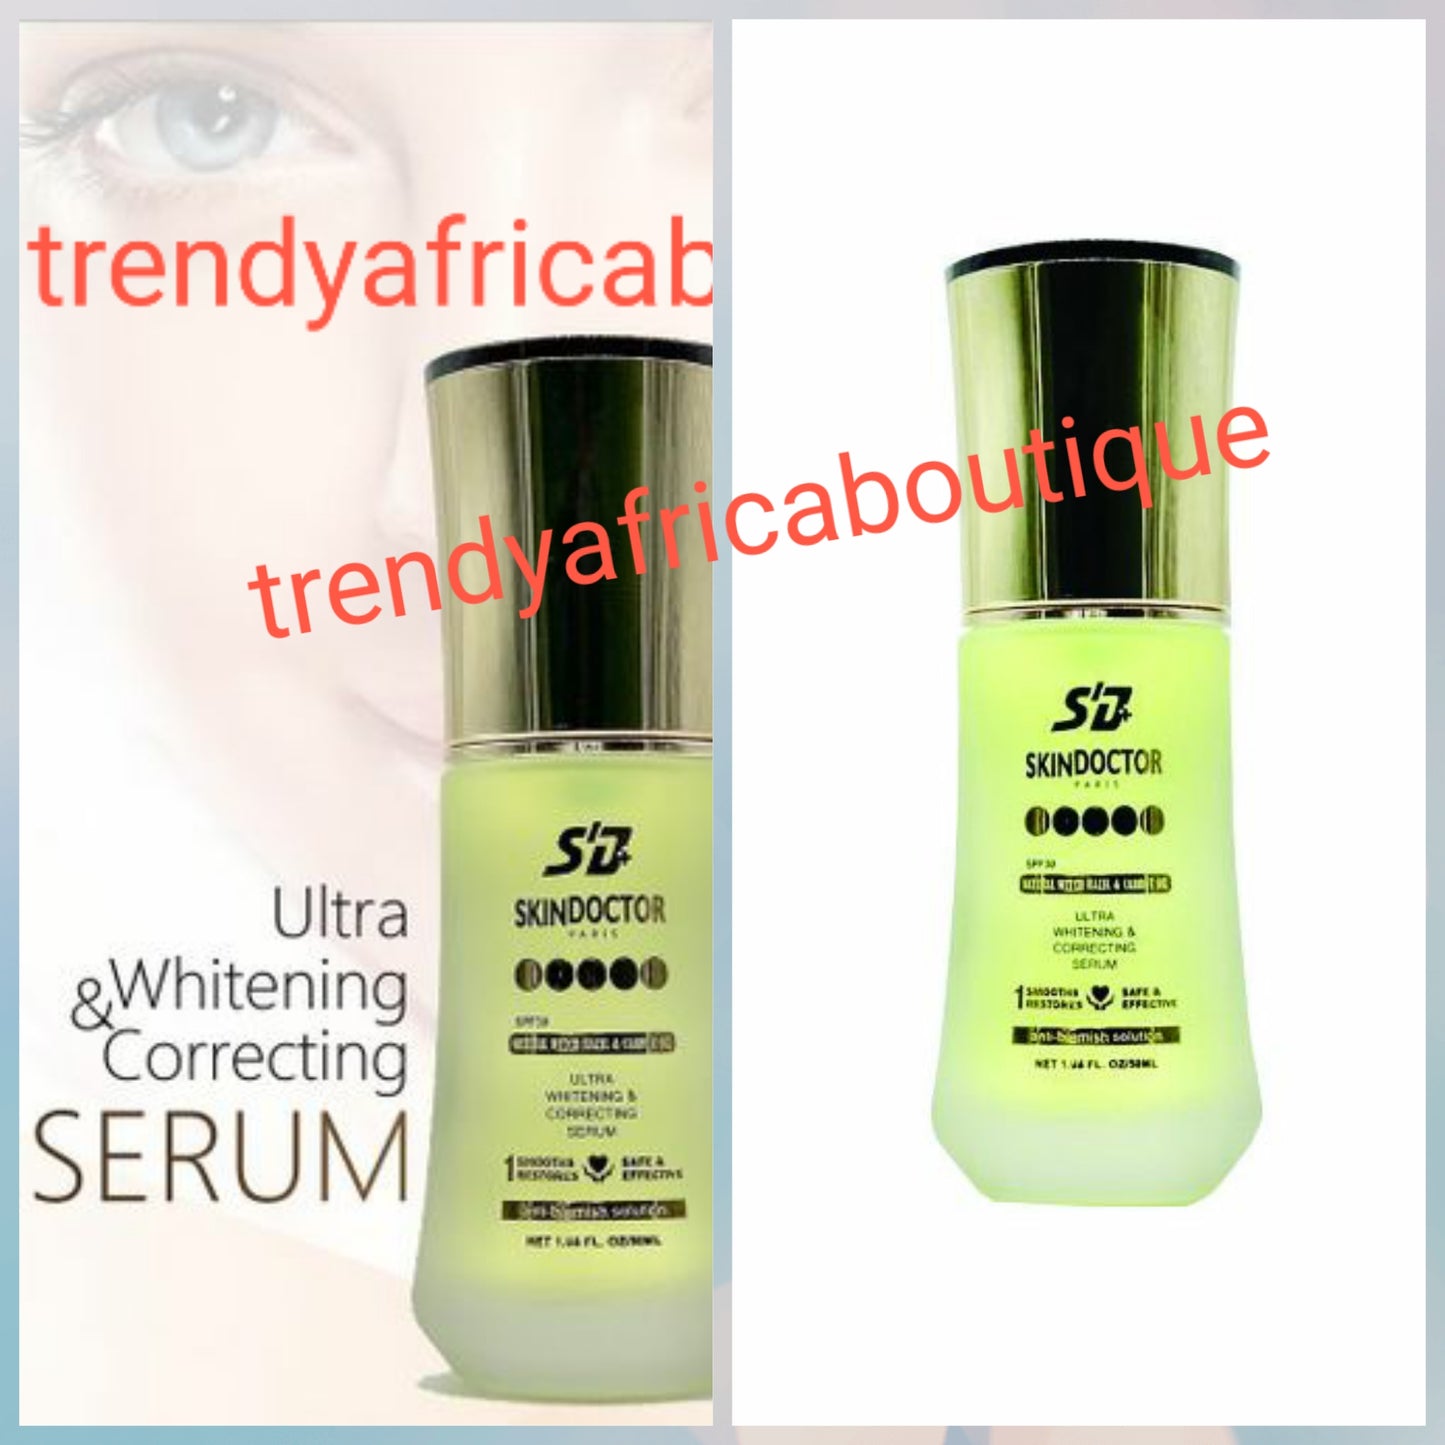 Skin Dorctor Paris Ultra whiteninc correcting serum/oil. Work against scars & marks. Works very well with any skin Dr. Body Lotions. 50ML bottle. Can also be applied directly on damp clean skin